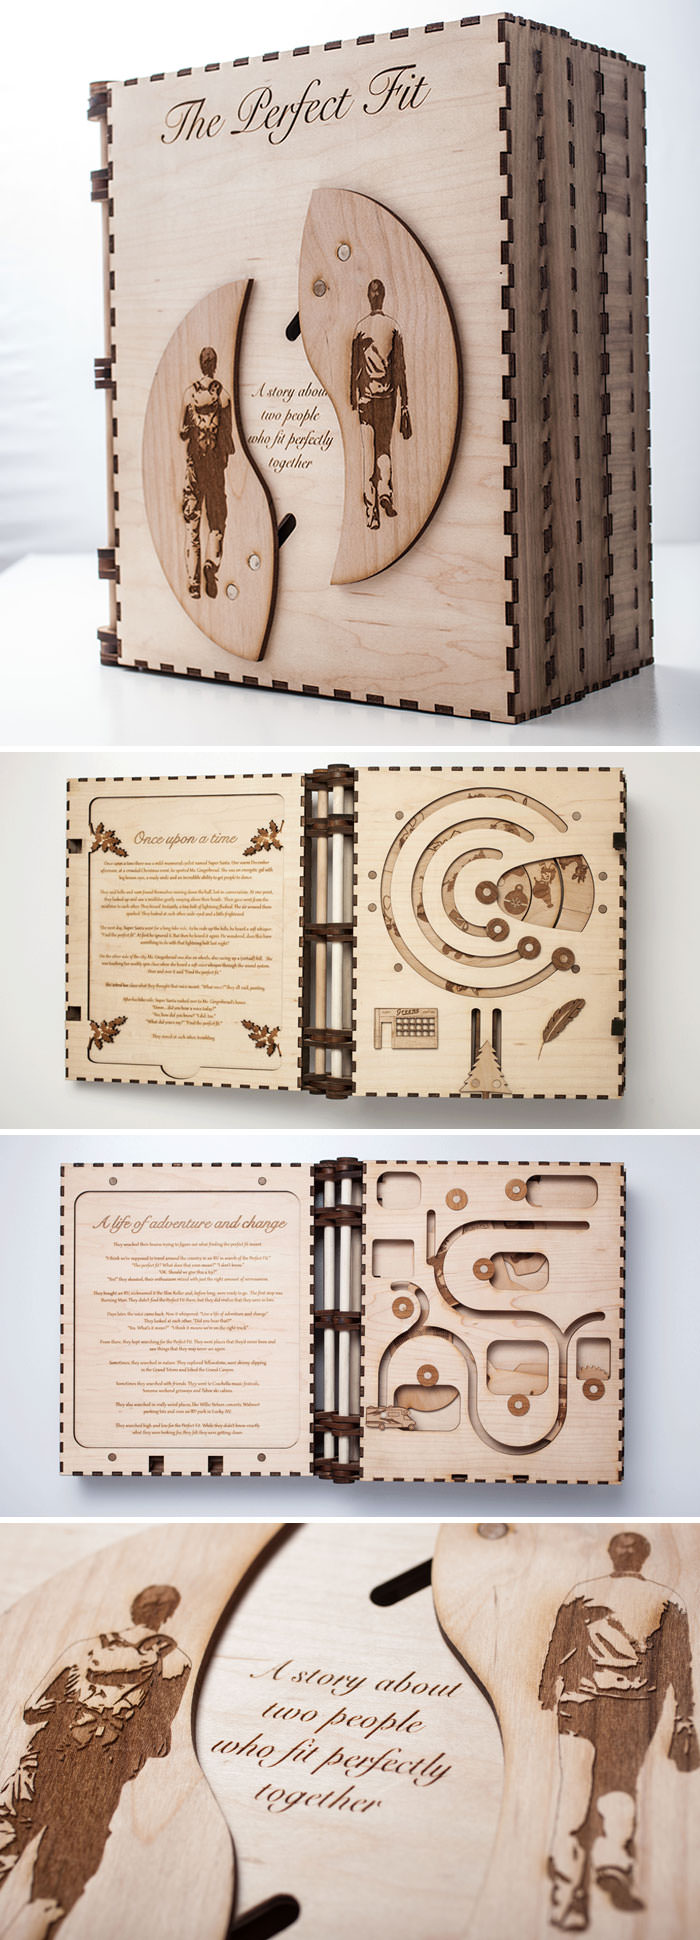 My girlfriend loves fairytales, so to propose, I built her a fairytale storybook with secret puzzles inside.